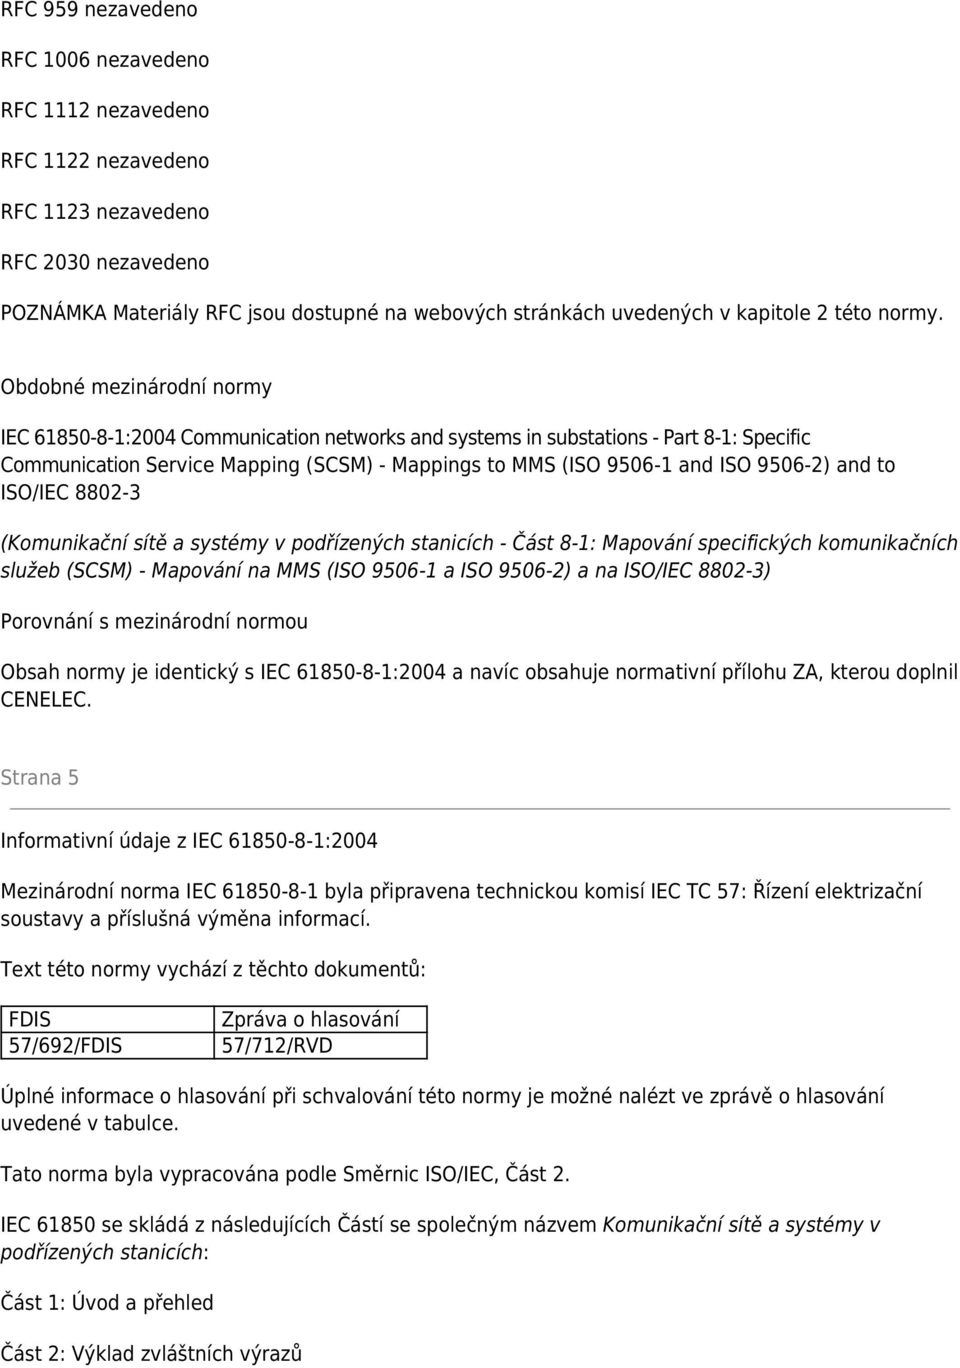 Obdobné mezinárodní normy IEC 61850-8-1:2004 Communication networks and systems in substations - Part 8-1: Specific Communication Service Mapping (SCSM) - Mappings to MMS (ISO 9506-1 and ISO 9506-2)